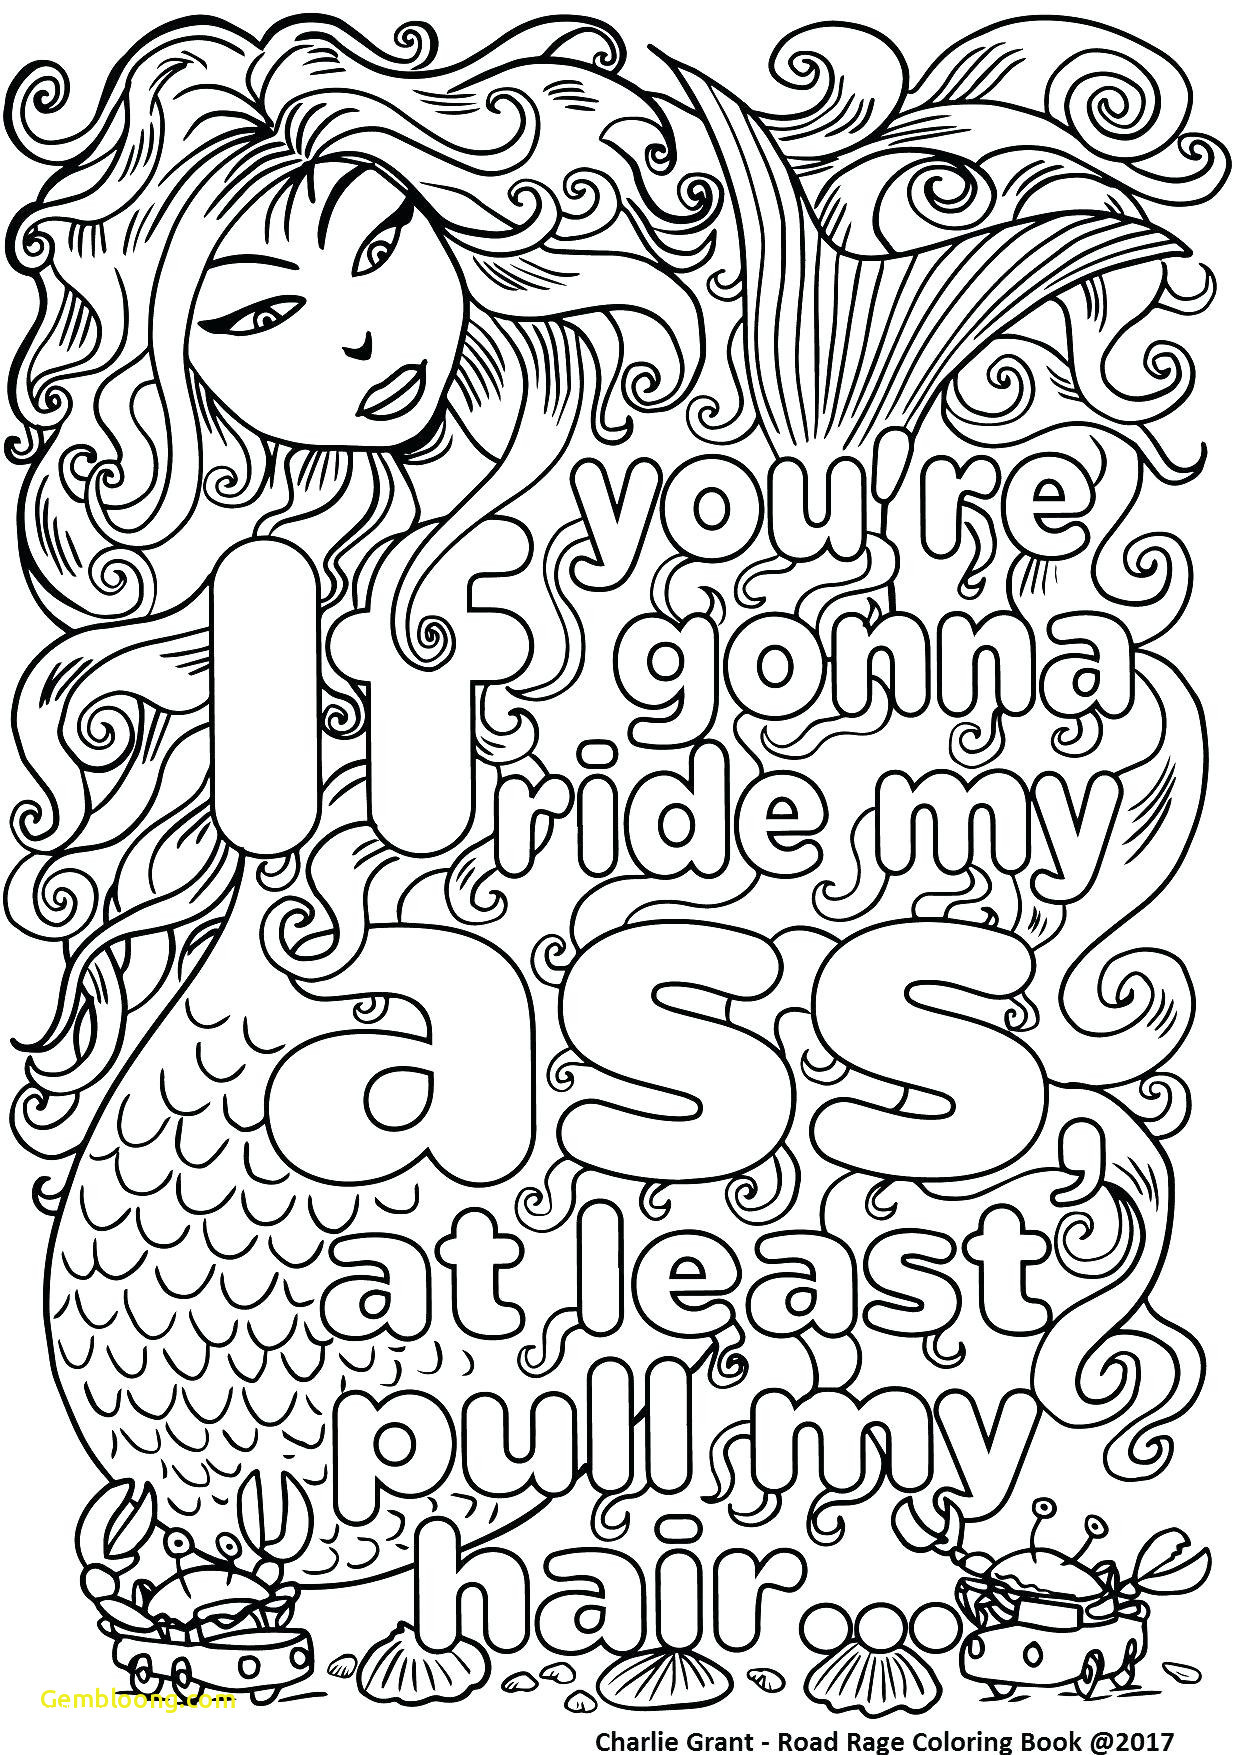 coloring pages : Swear Word Coloring Pages For Adults Art Coloring Pages  Coloring For Adults Swear Words Coloring Swear Word Coloring Pages for  Adults ~ affiliateprogrambook.com